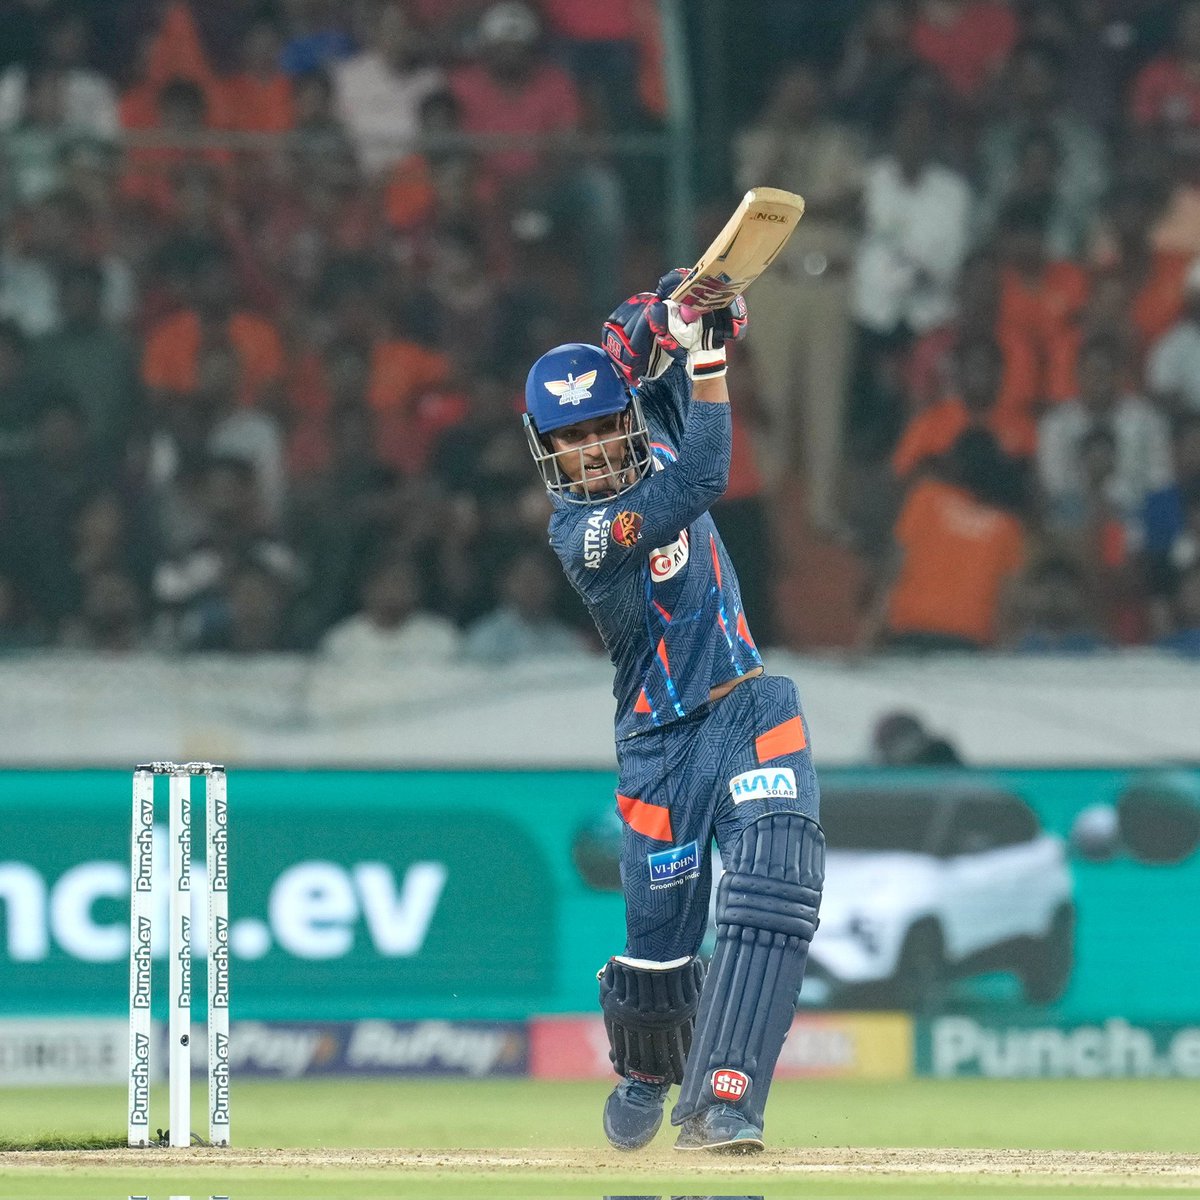 What a great innings by Ayush Badoni under pressure ! Fantastic innings by him of 55*,well done by Nicholas Pooran too who made 48* himself! Both stood up when entire team failed.

#SRHvsLSG • #AyushBadoni • #SRHvLSG